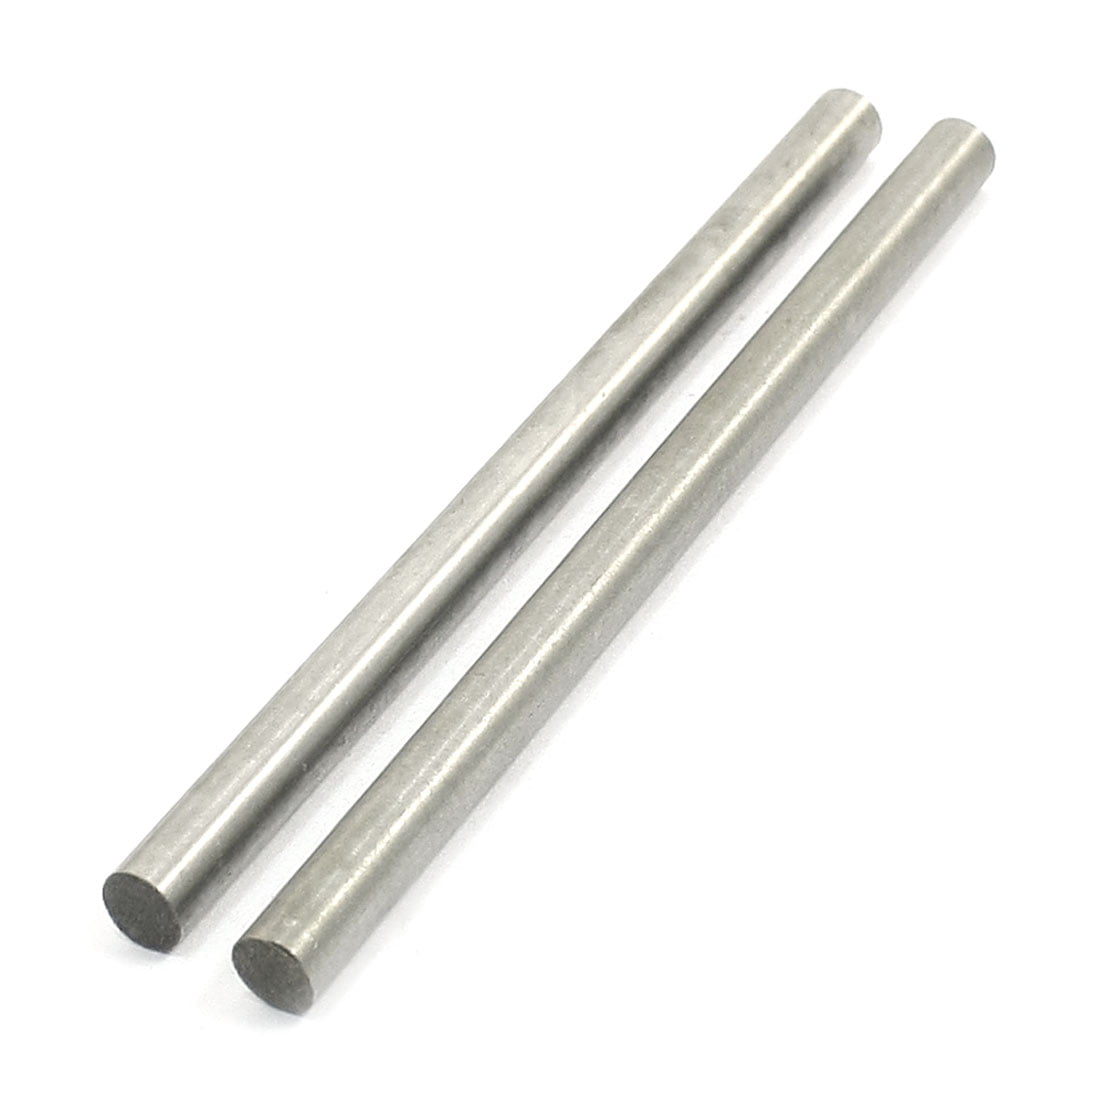 20PCS 300mm x 2mm Stainless Steel Round Rod Axle Bars for RC Toys P2S2 